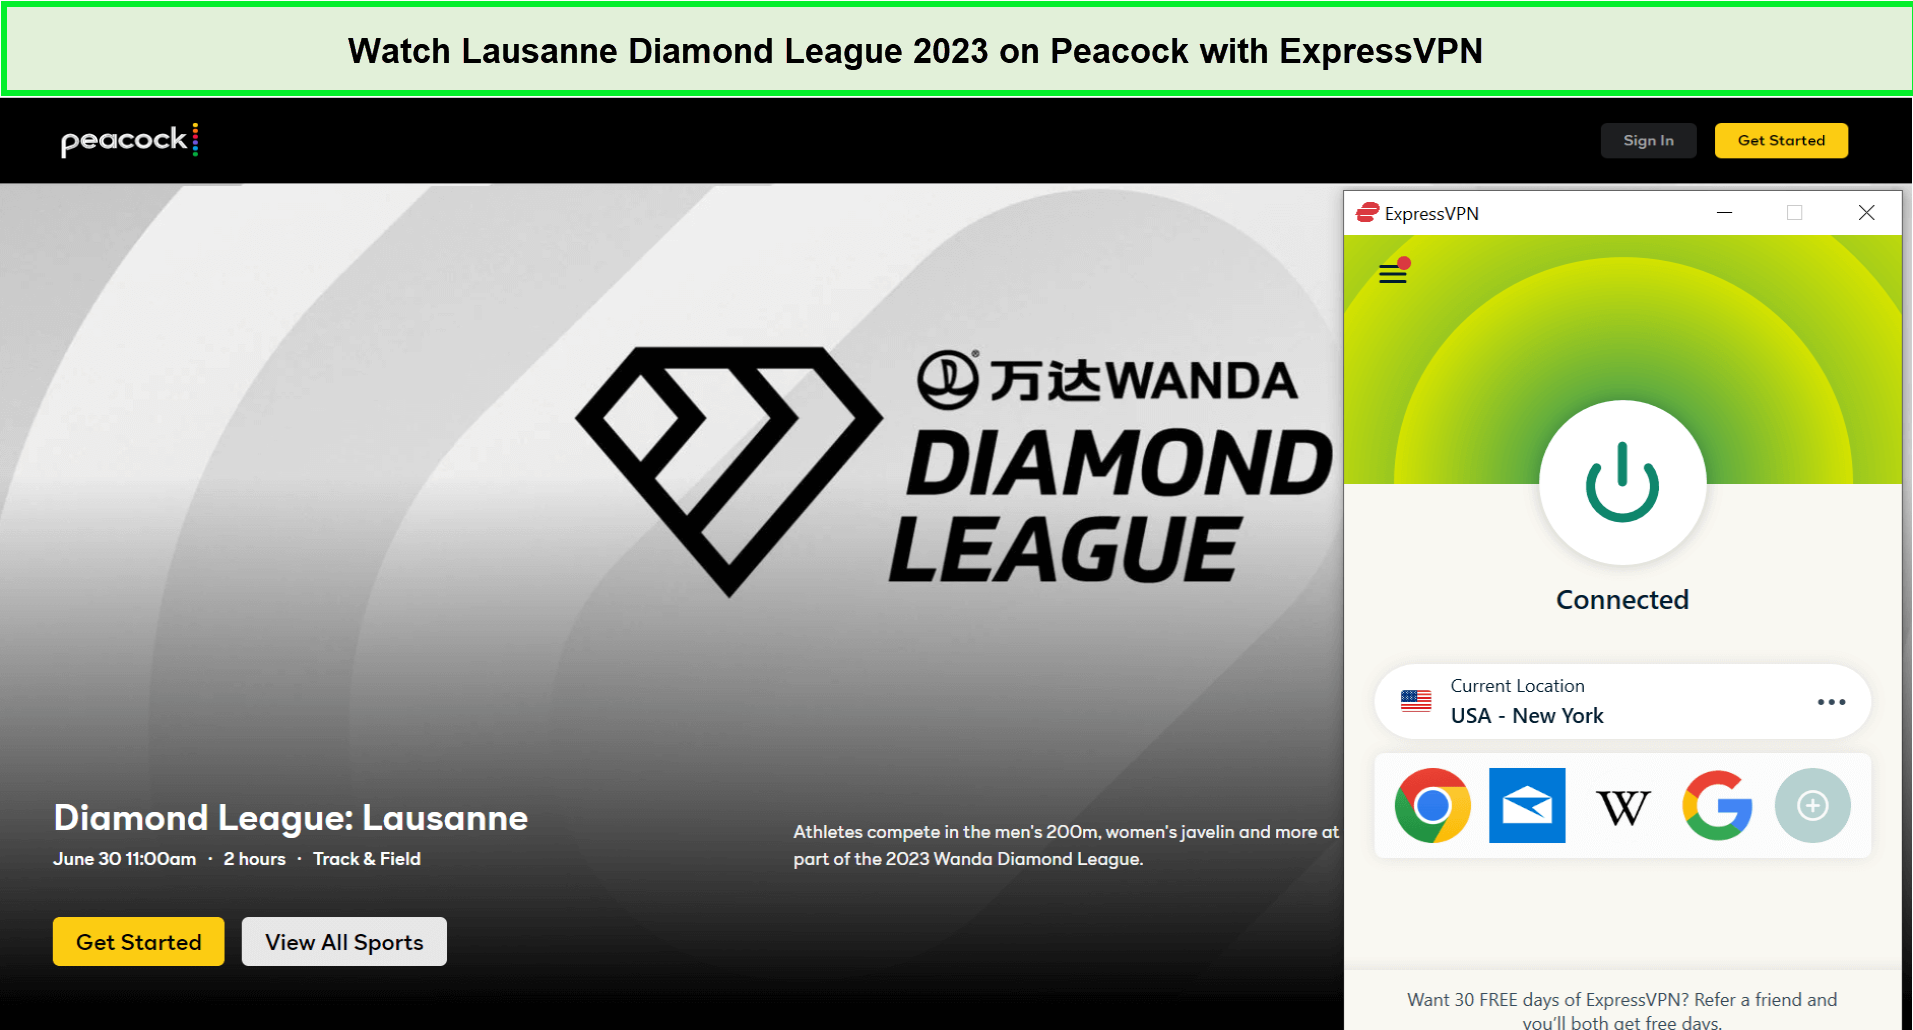 Watch-Lausanne-Diamond-League-2023-in-France-on-Peacock-with-ExpressVPN